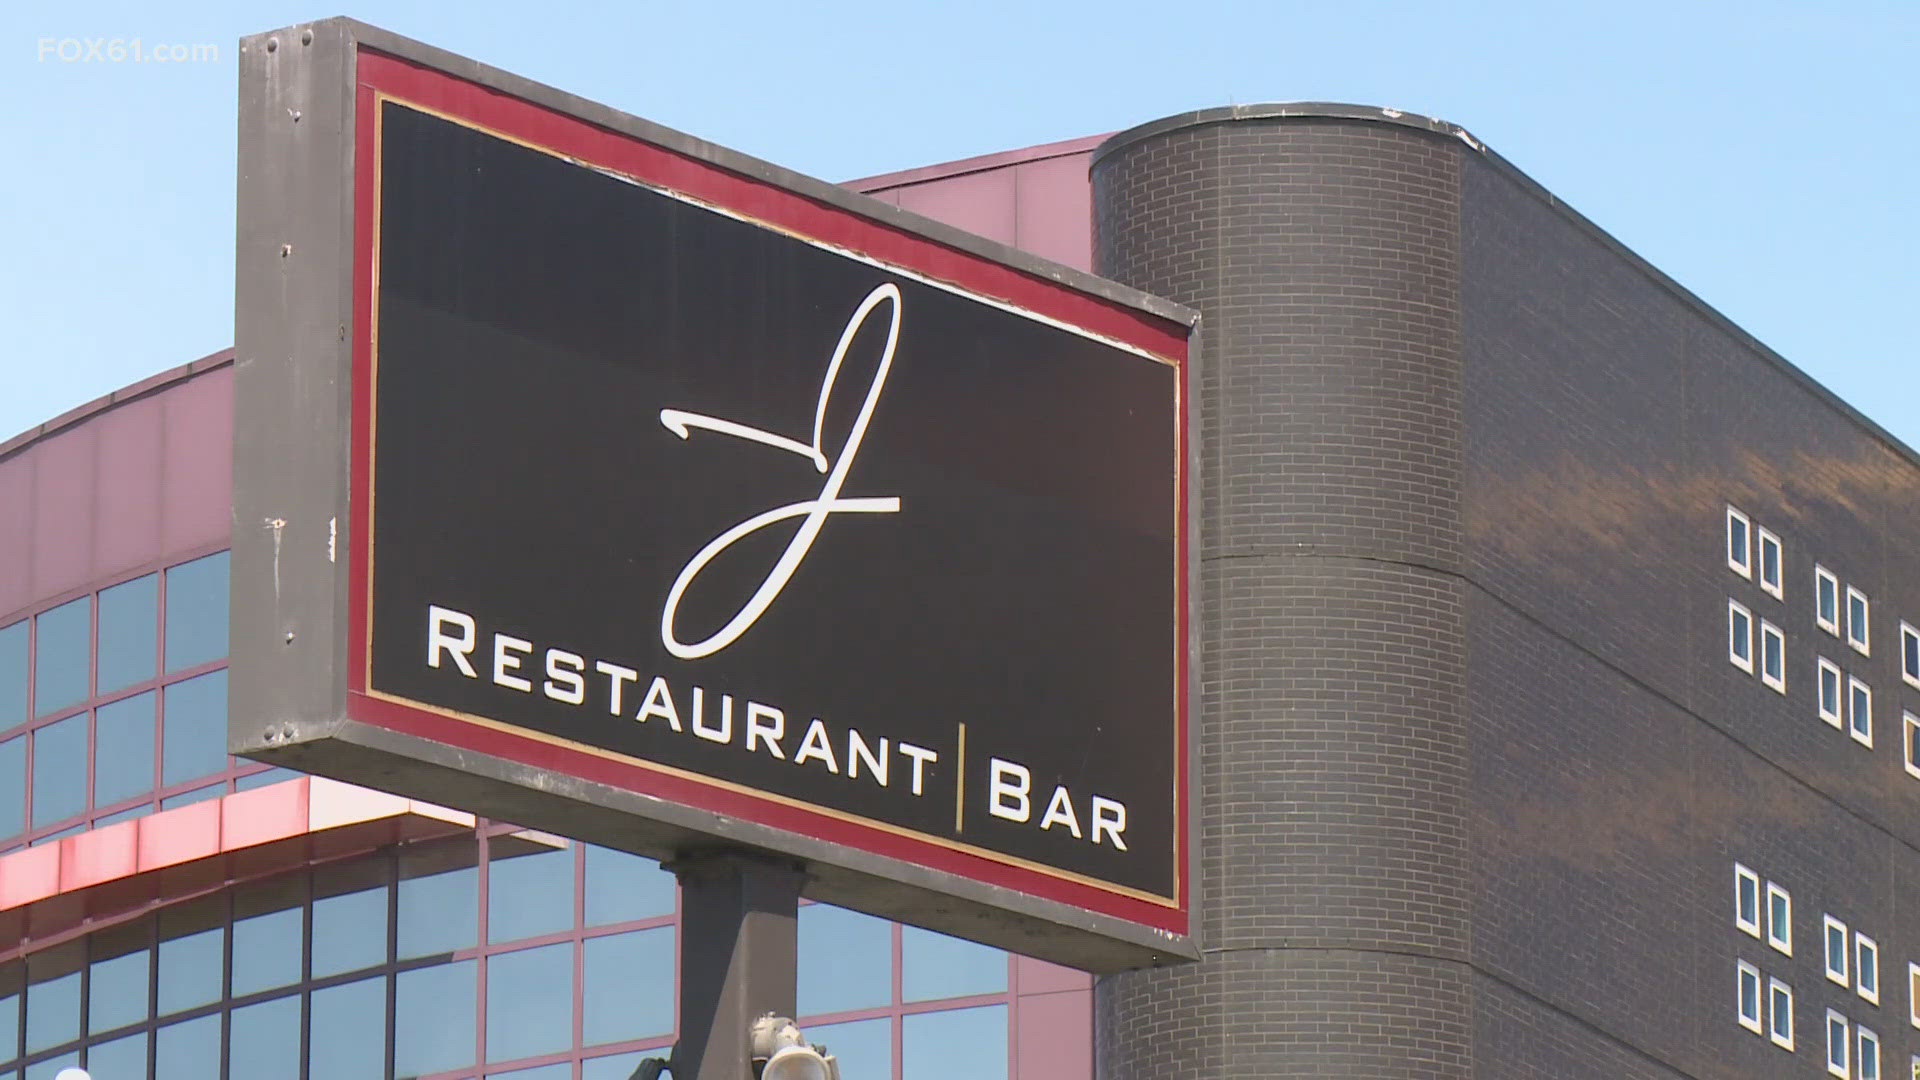 The owner of J Restaurant and Bar sold the land on Washington Street to help Connecticut Children's Medical Center expand.